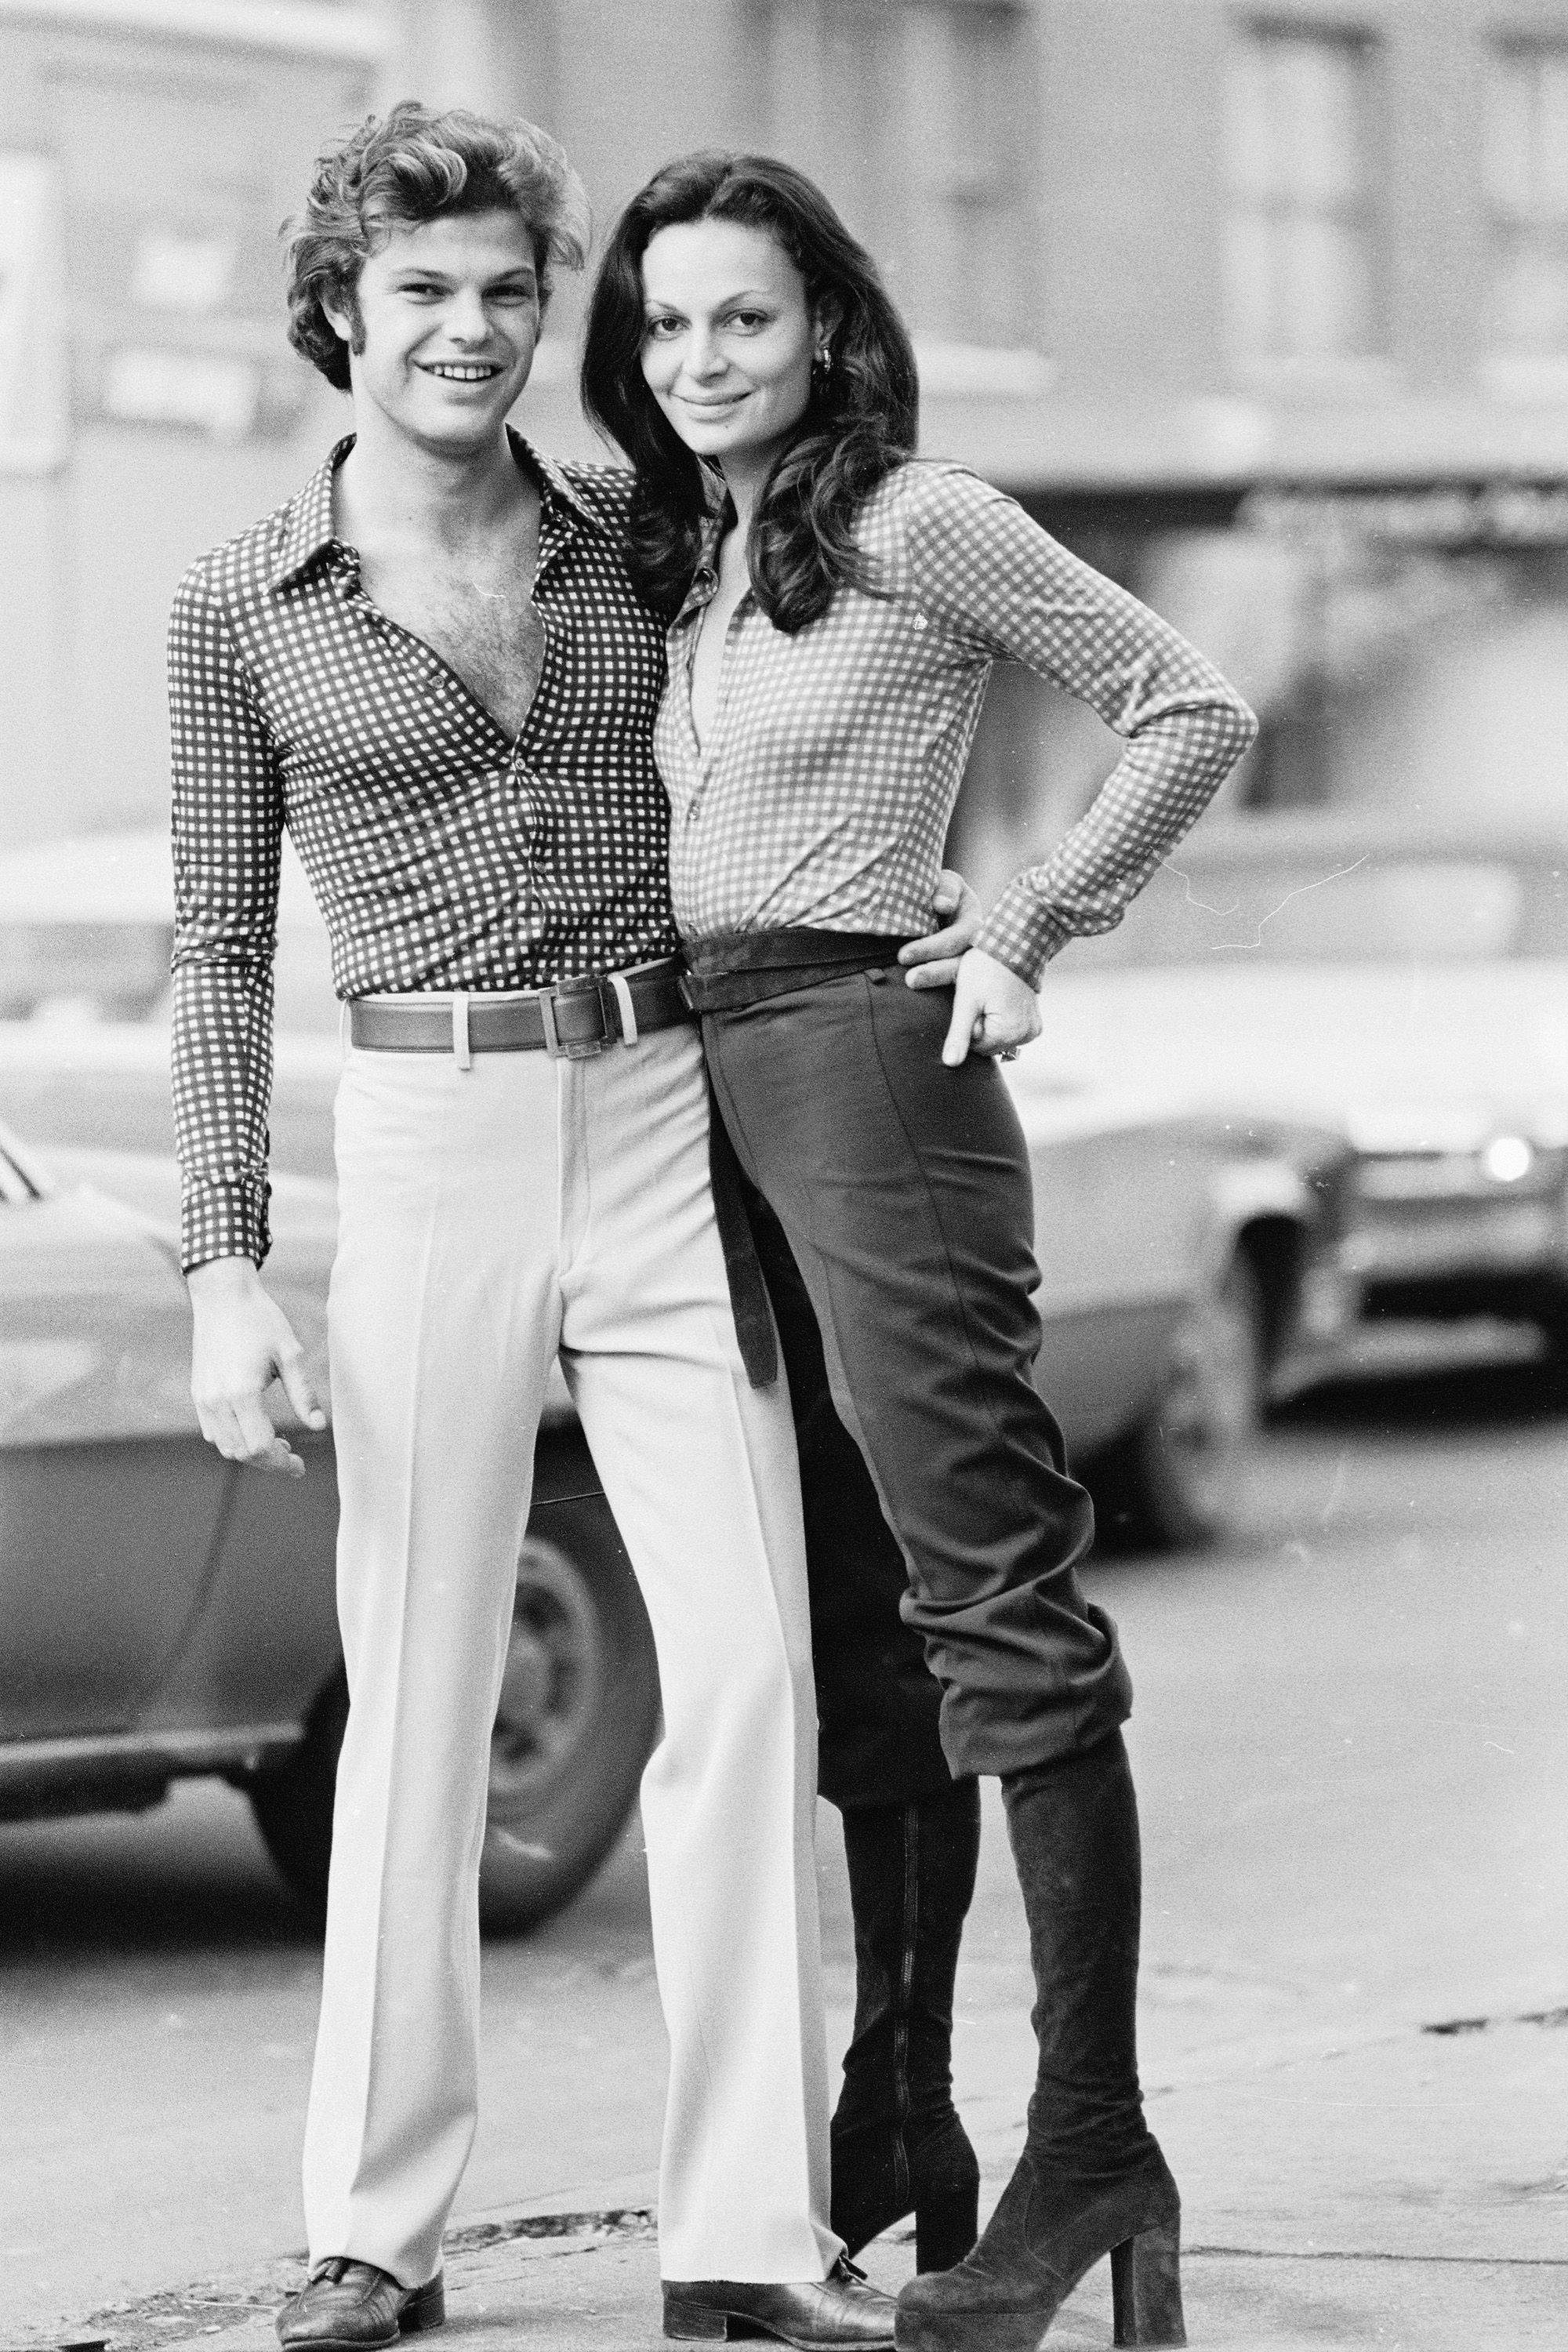 How to Style ICONIC 70s Outfits! 